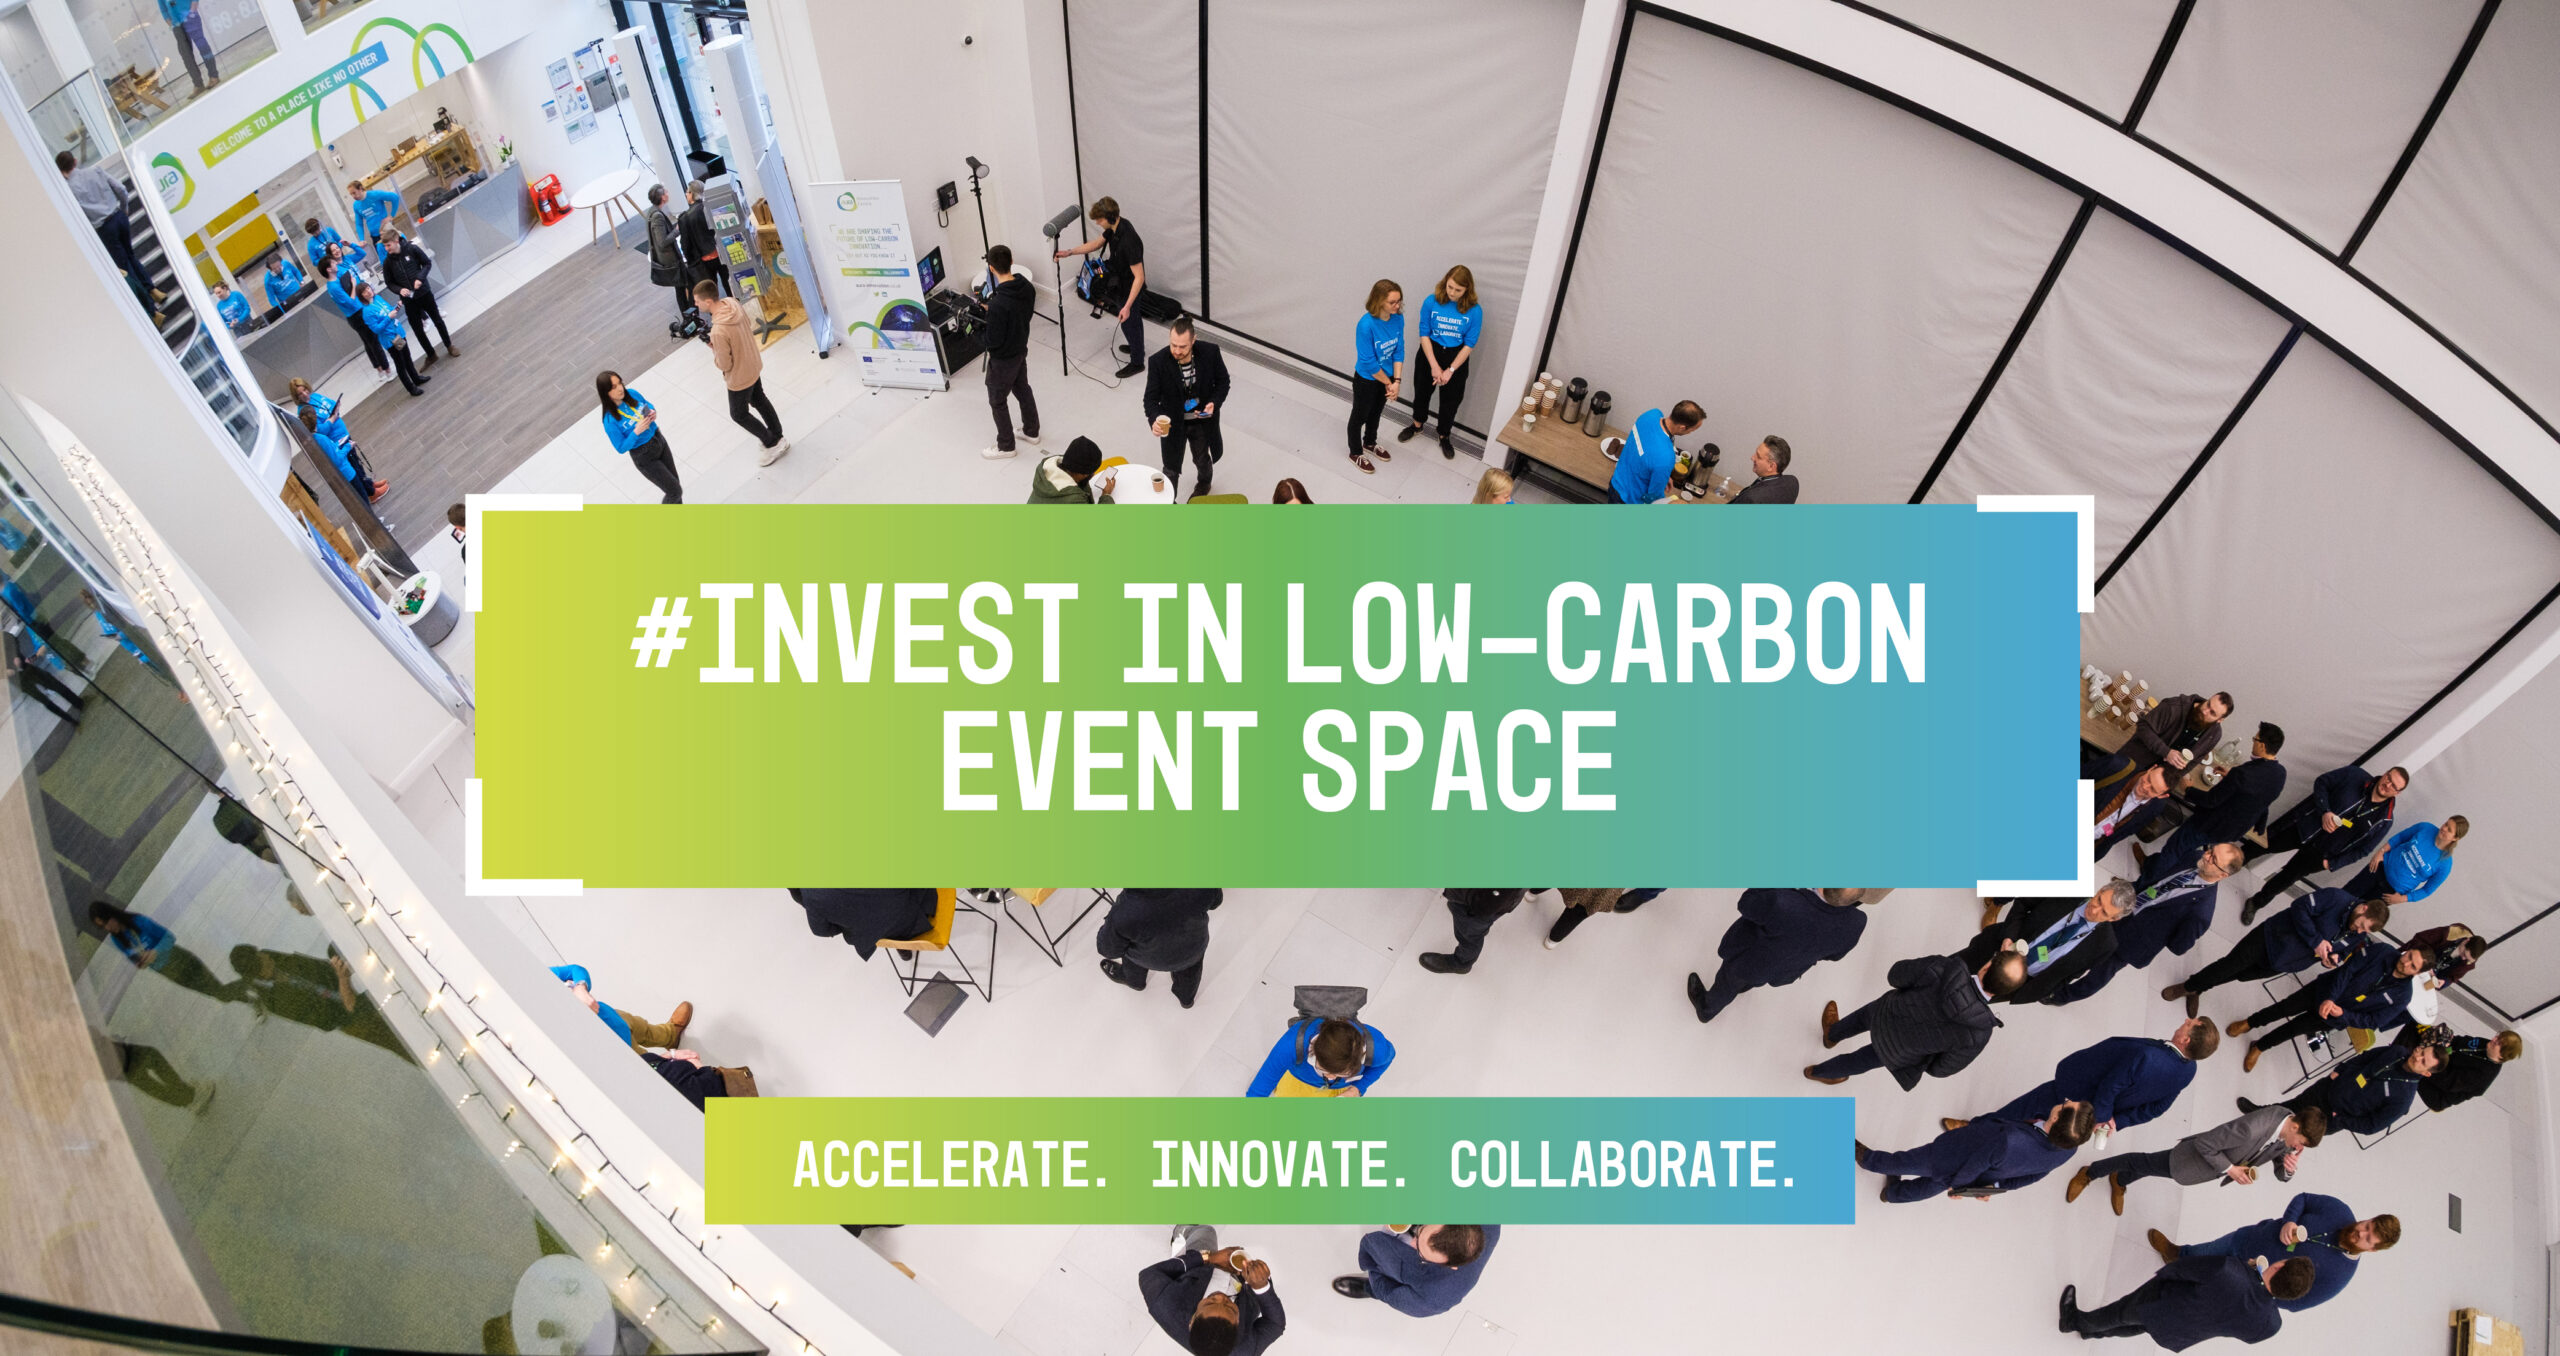 #Invest in low-carbon event space